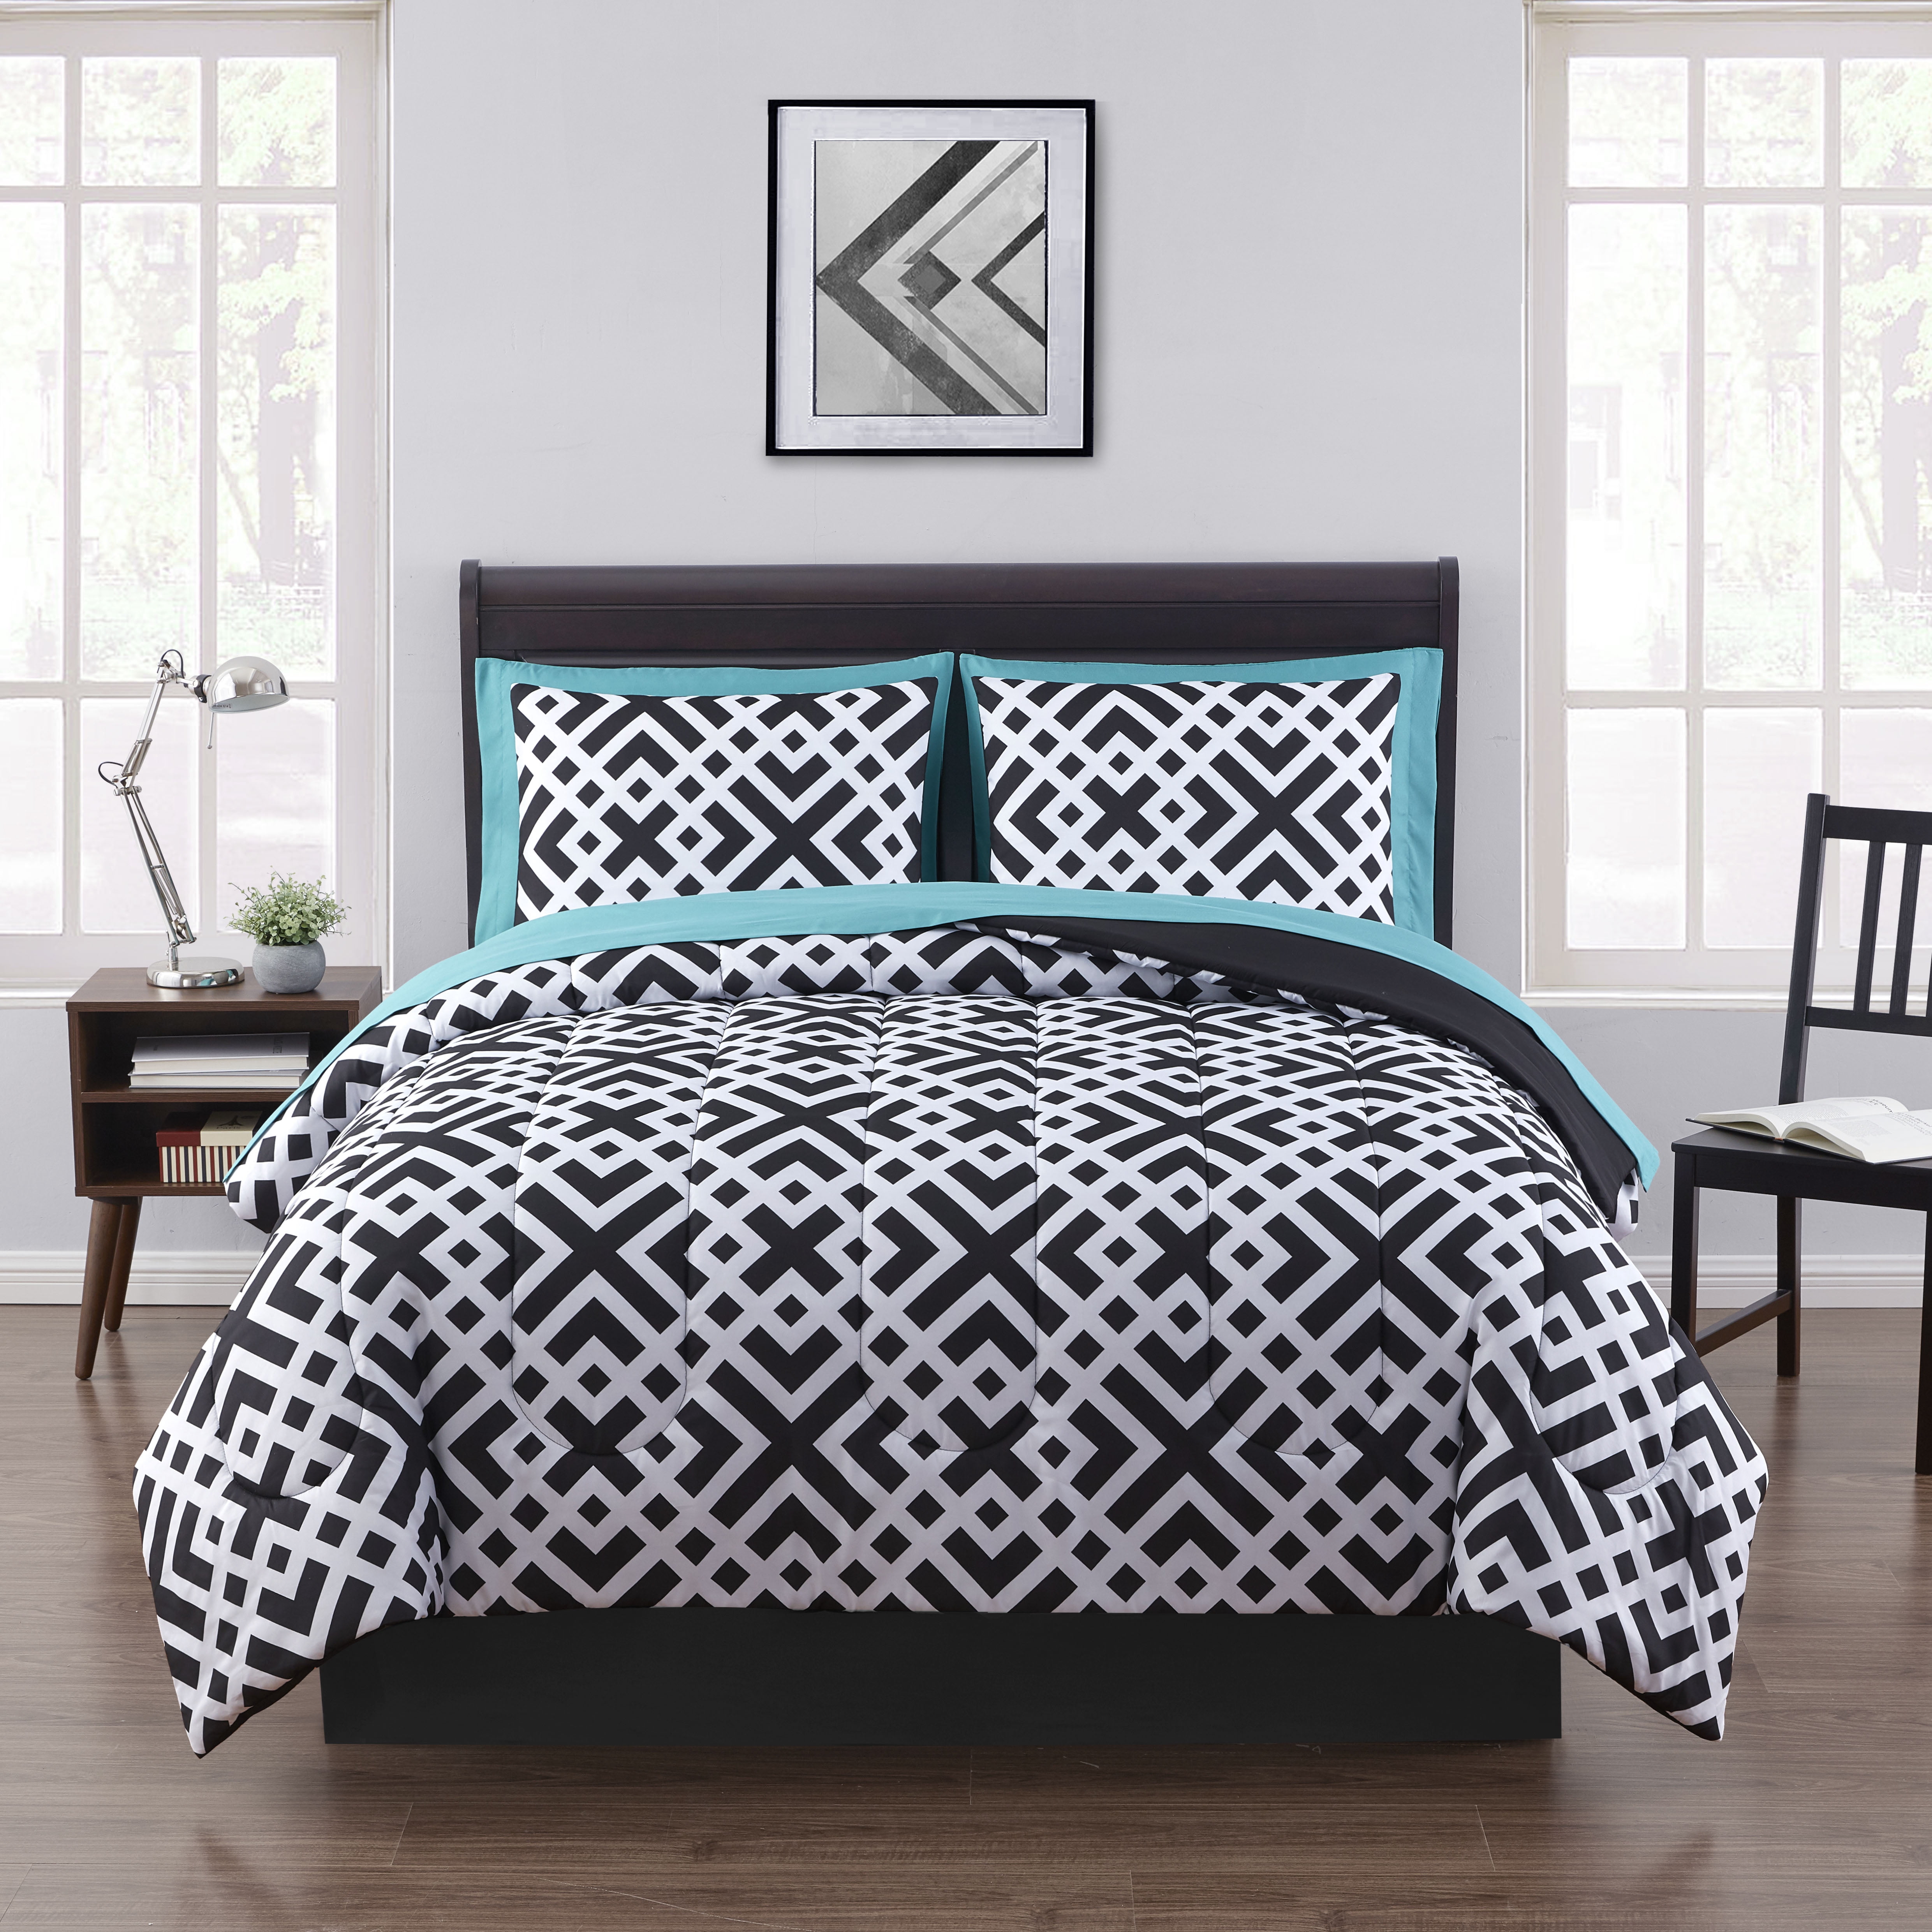 8 Piece Queen Size Bed in a Bag Set Black and White Fitted Flat Sheet Pillowcase for sale online 